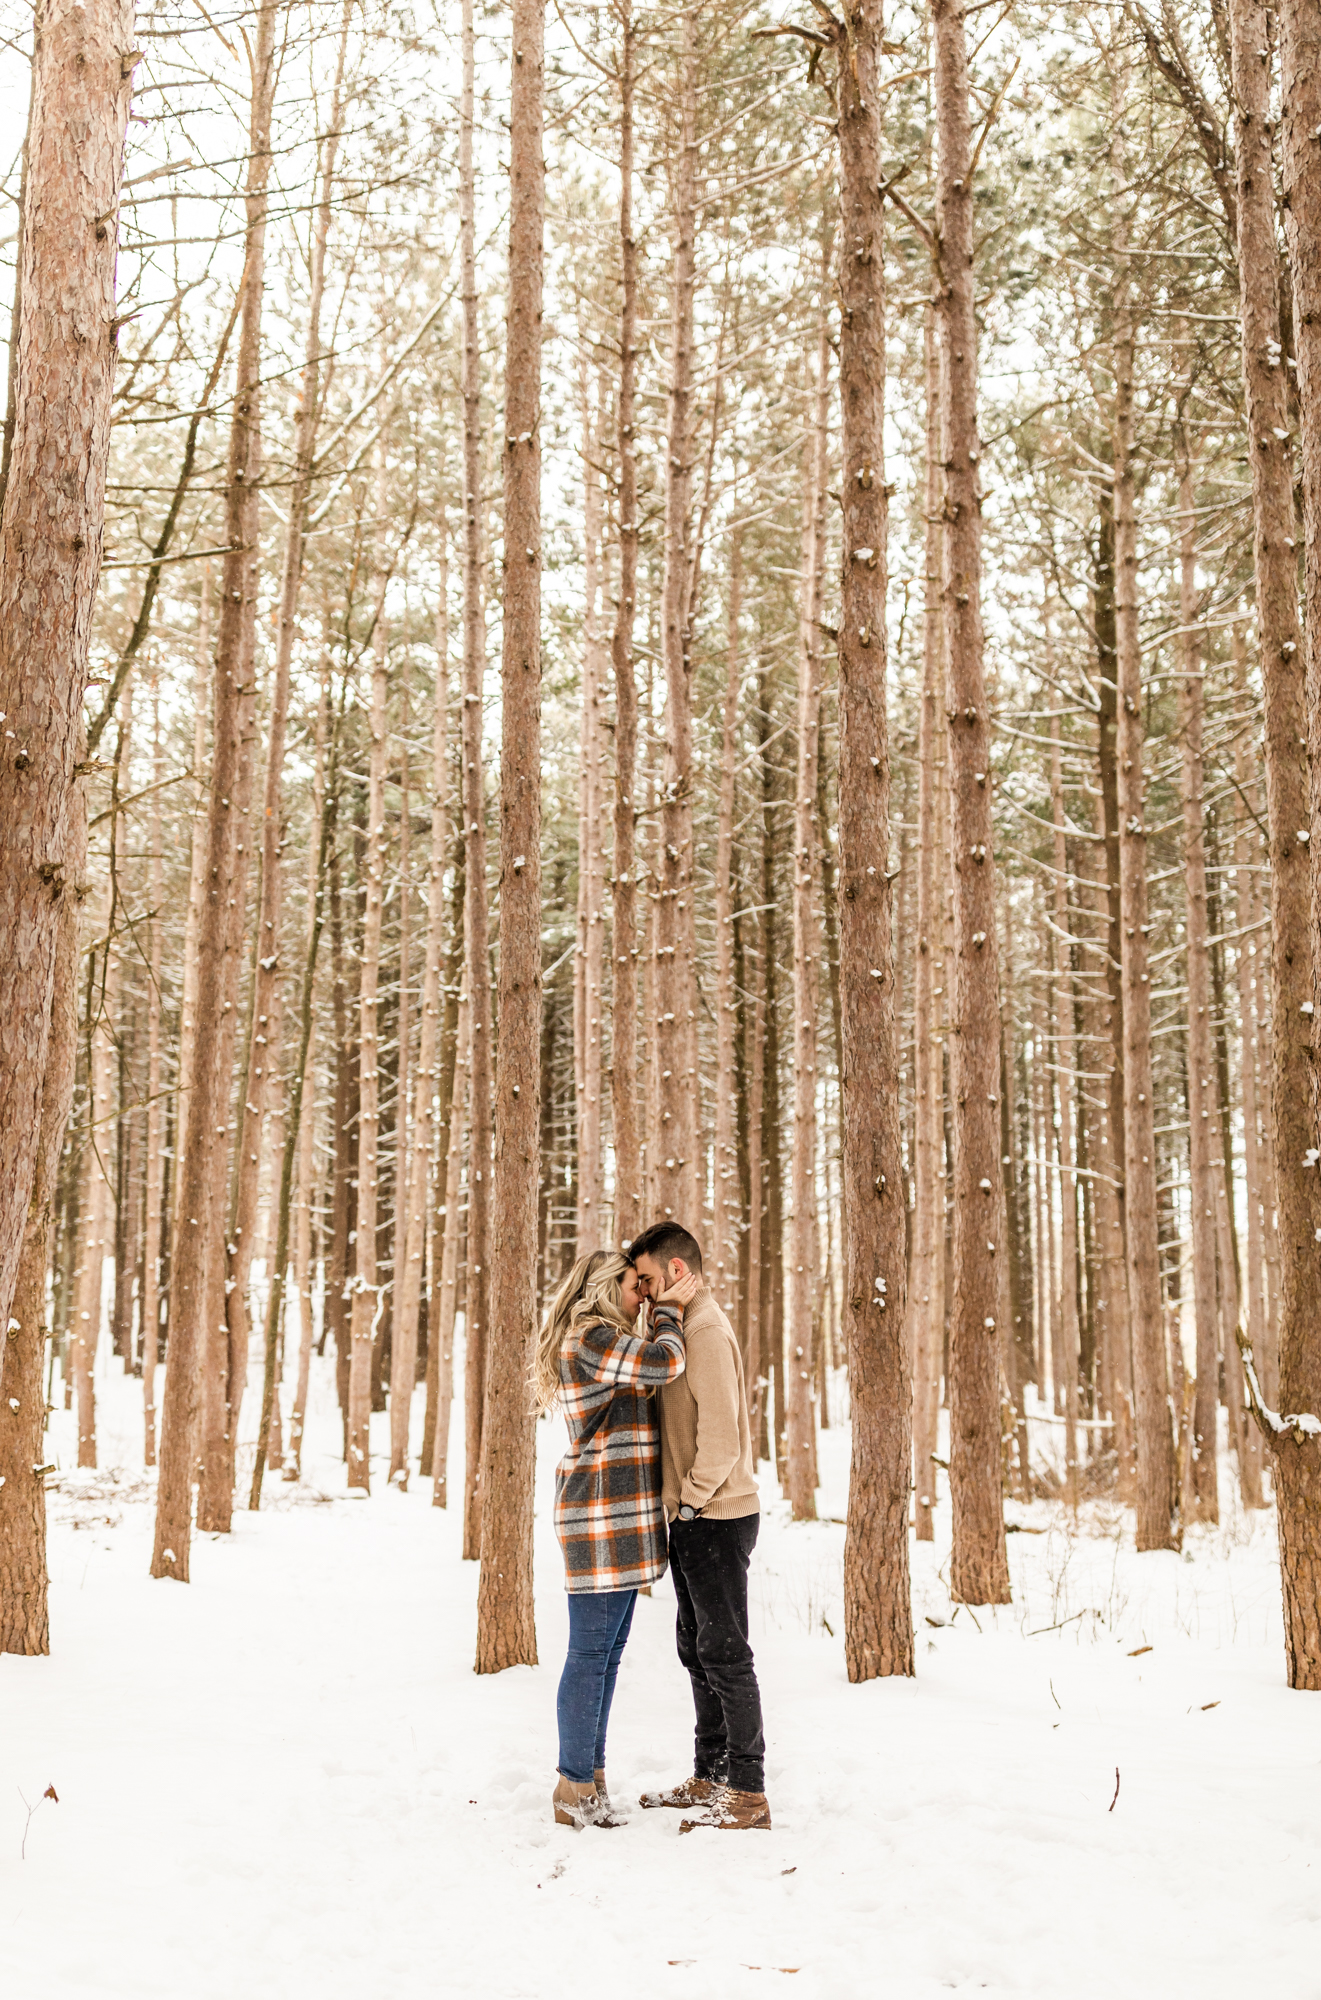 Couple standing together in snowy woods for engagement photo, outfit inspiration 